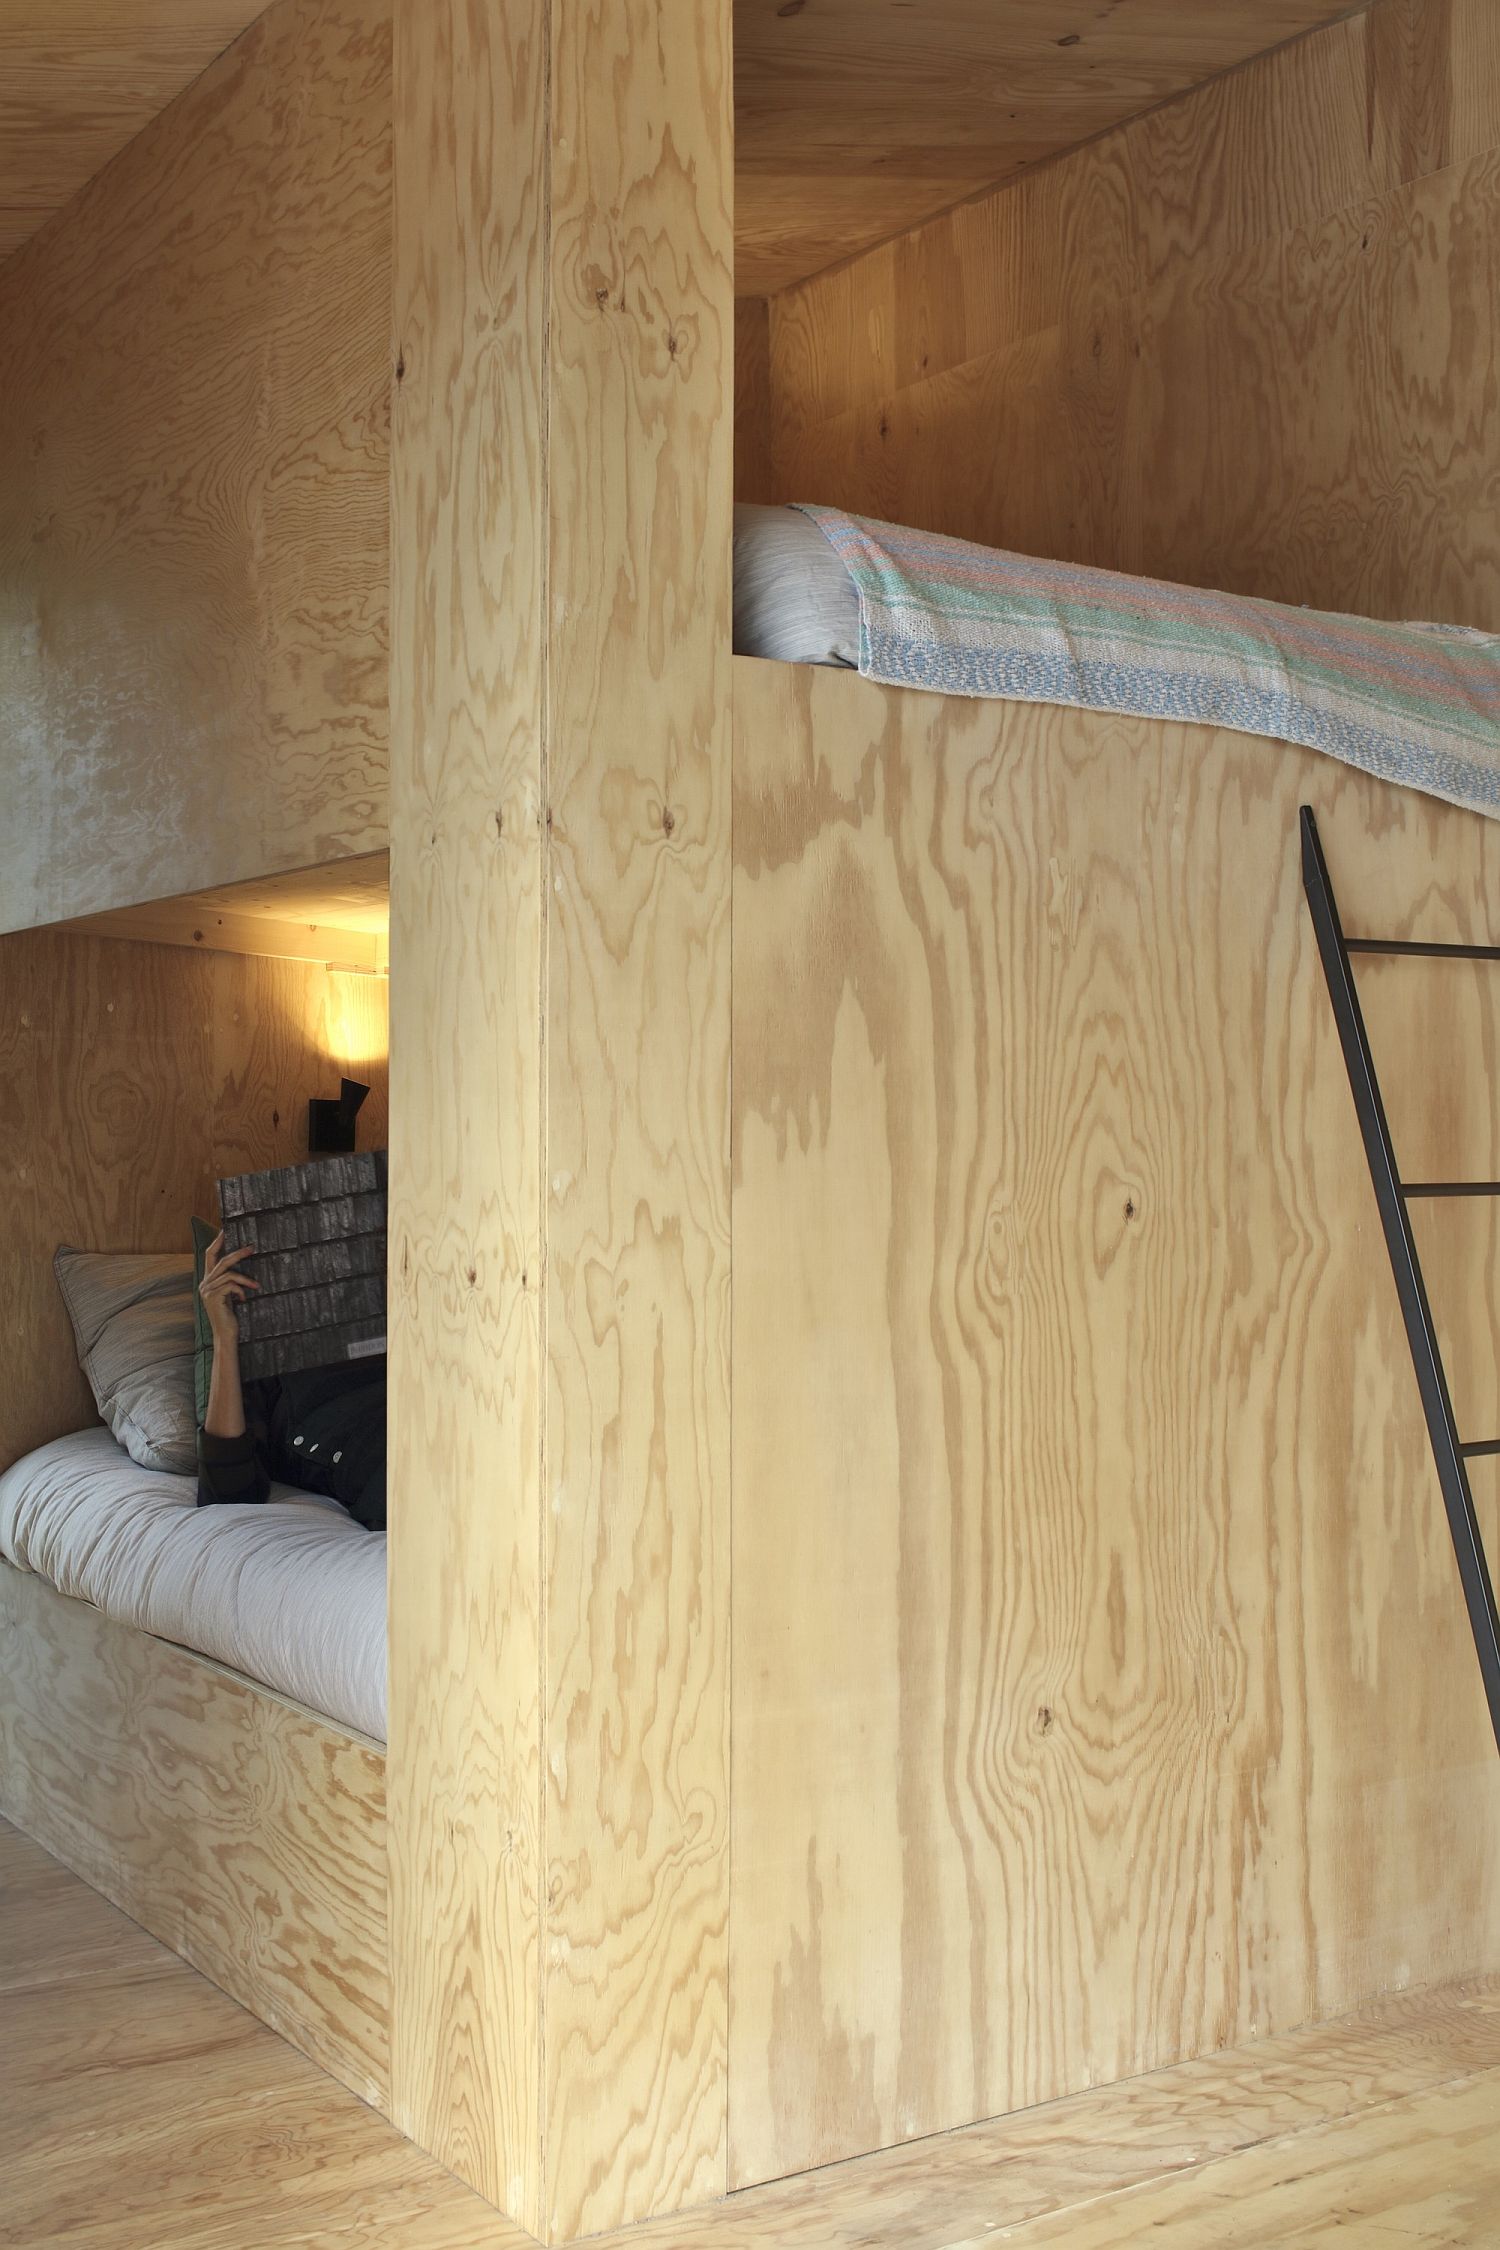 Bunk beds inside the cabin offer ample sleeping space